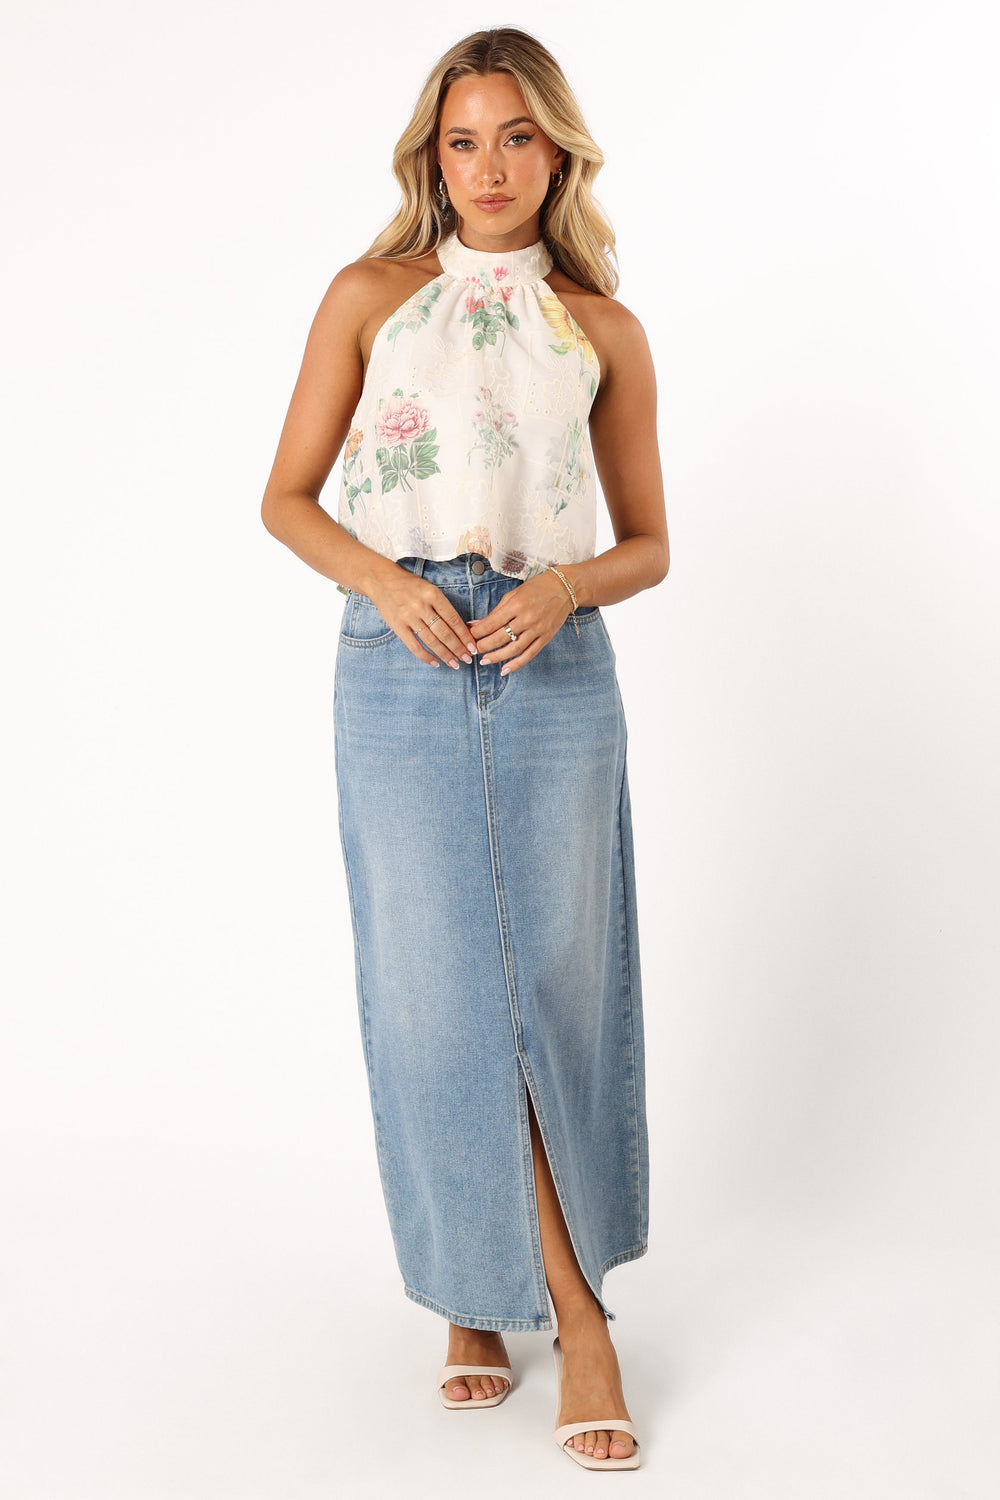 TOPS @Willa Halterneck Top - White Floral (Hold for Easter)